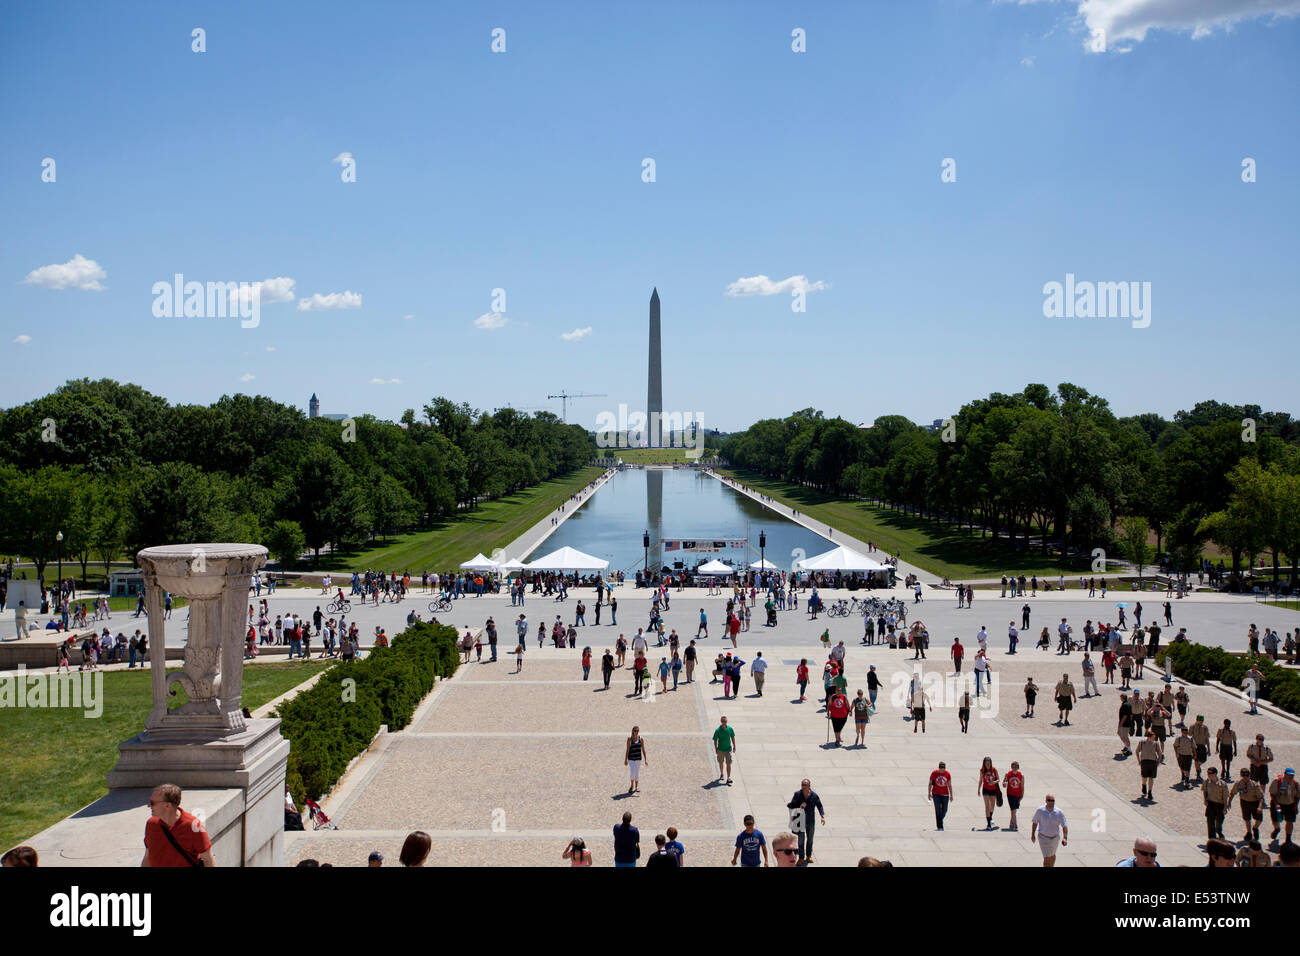 WASHINGTON D.C. - MAY 25 2014: The Washington Monument as seen from the Lincoln Memorial.  It is located on the National Mall in Stock Photo